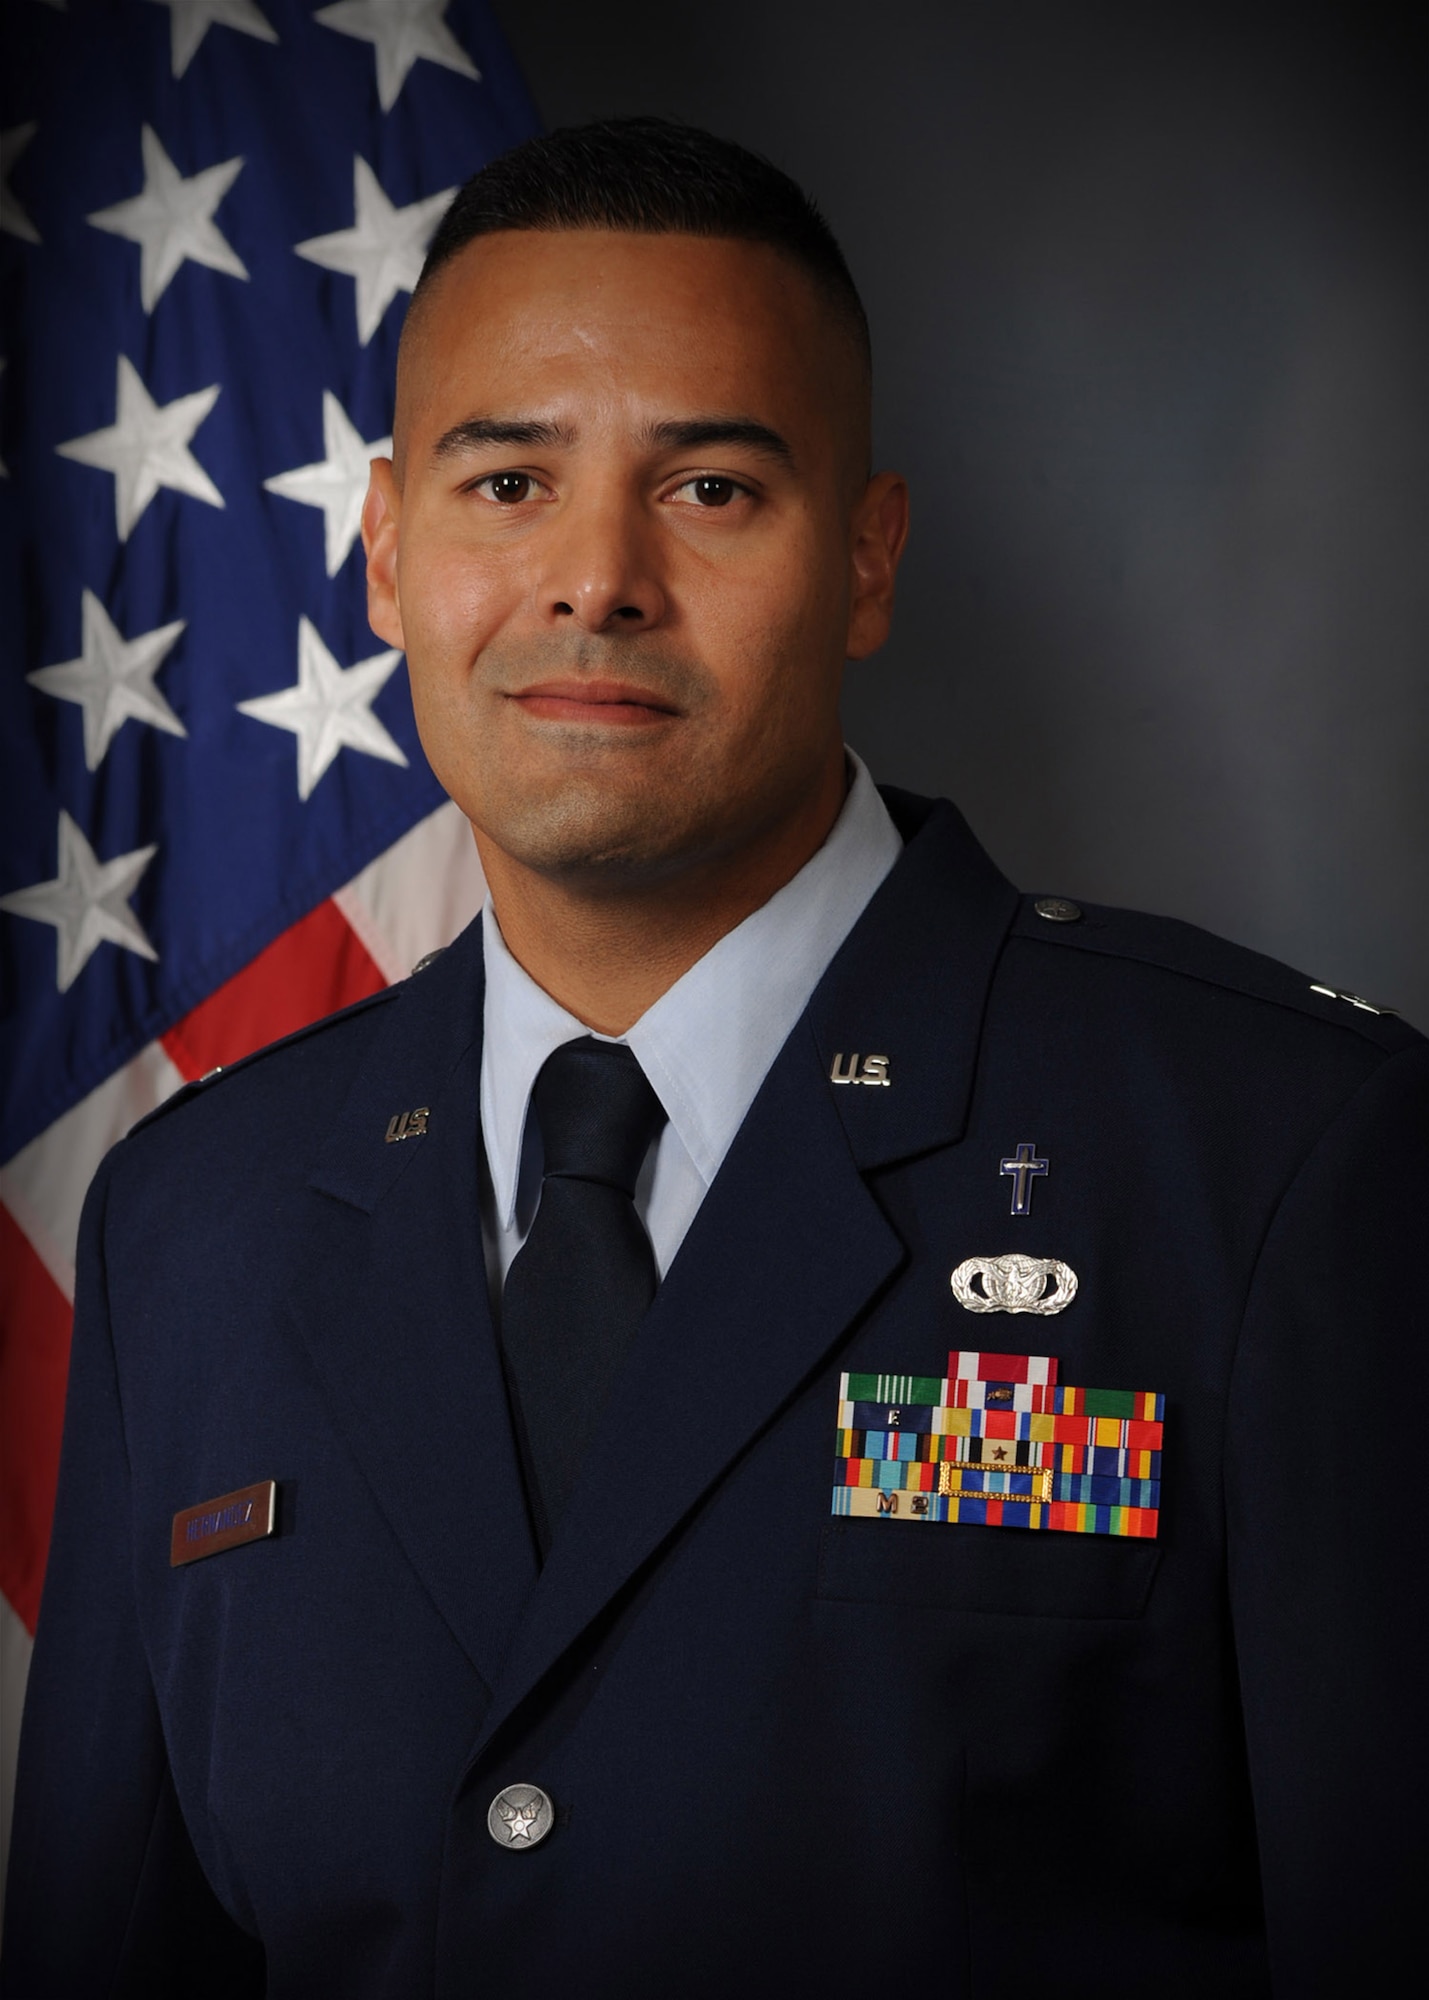 WRIGHT-PATTERSON AIR FORCE BASE, Ohio – Chaplain (Capt.) Sonny Hernandez, 445th Airlift Wing Chaplain Corps, is the Air Force Life Cycle Management Center Individual Mobilization Accession Company Grade Officer of the Year. (Courtesy photo)